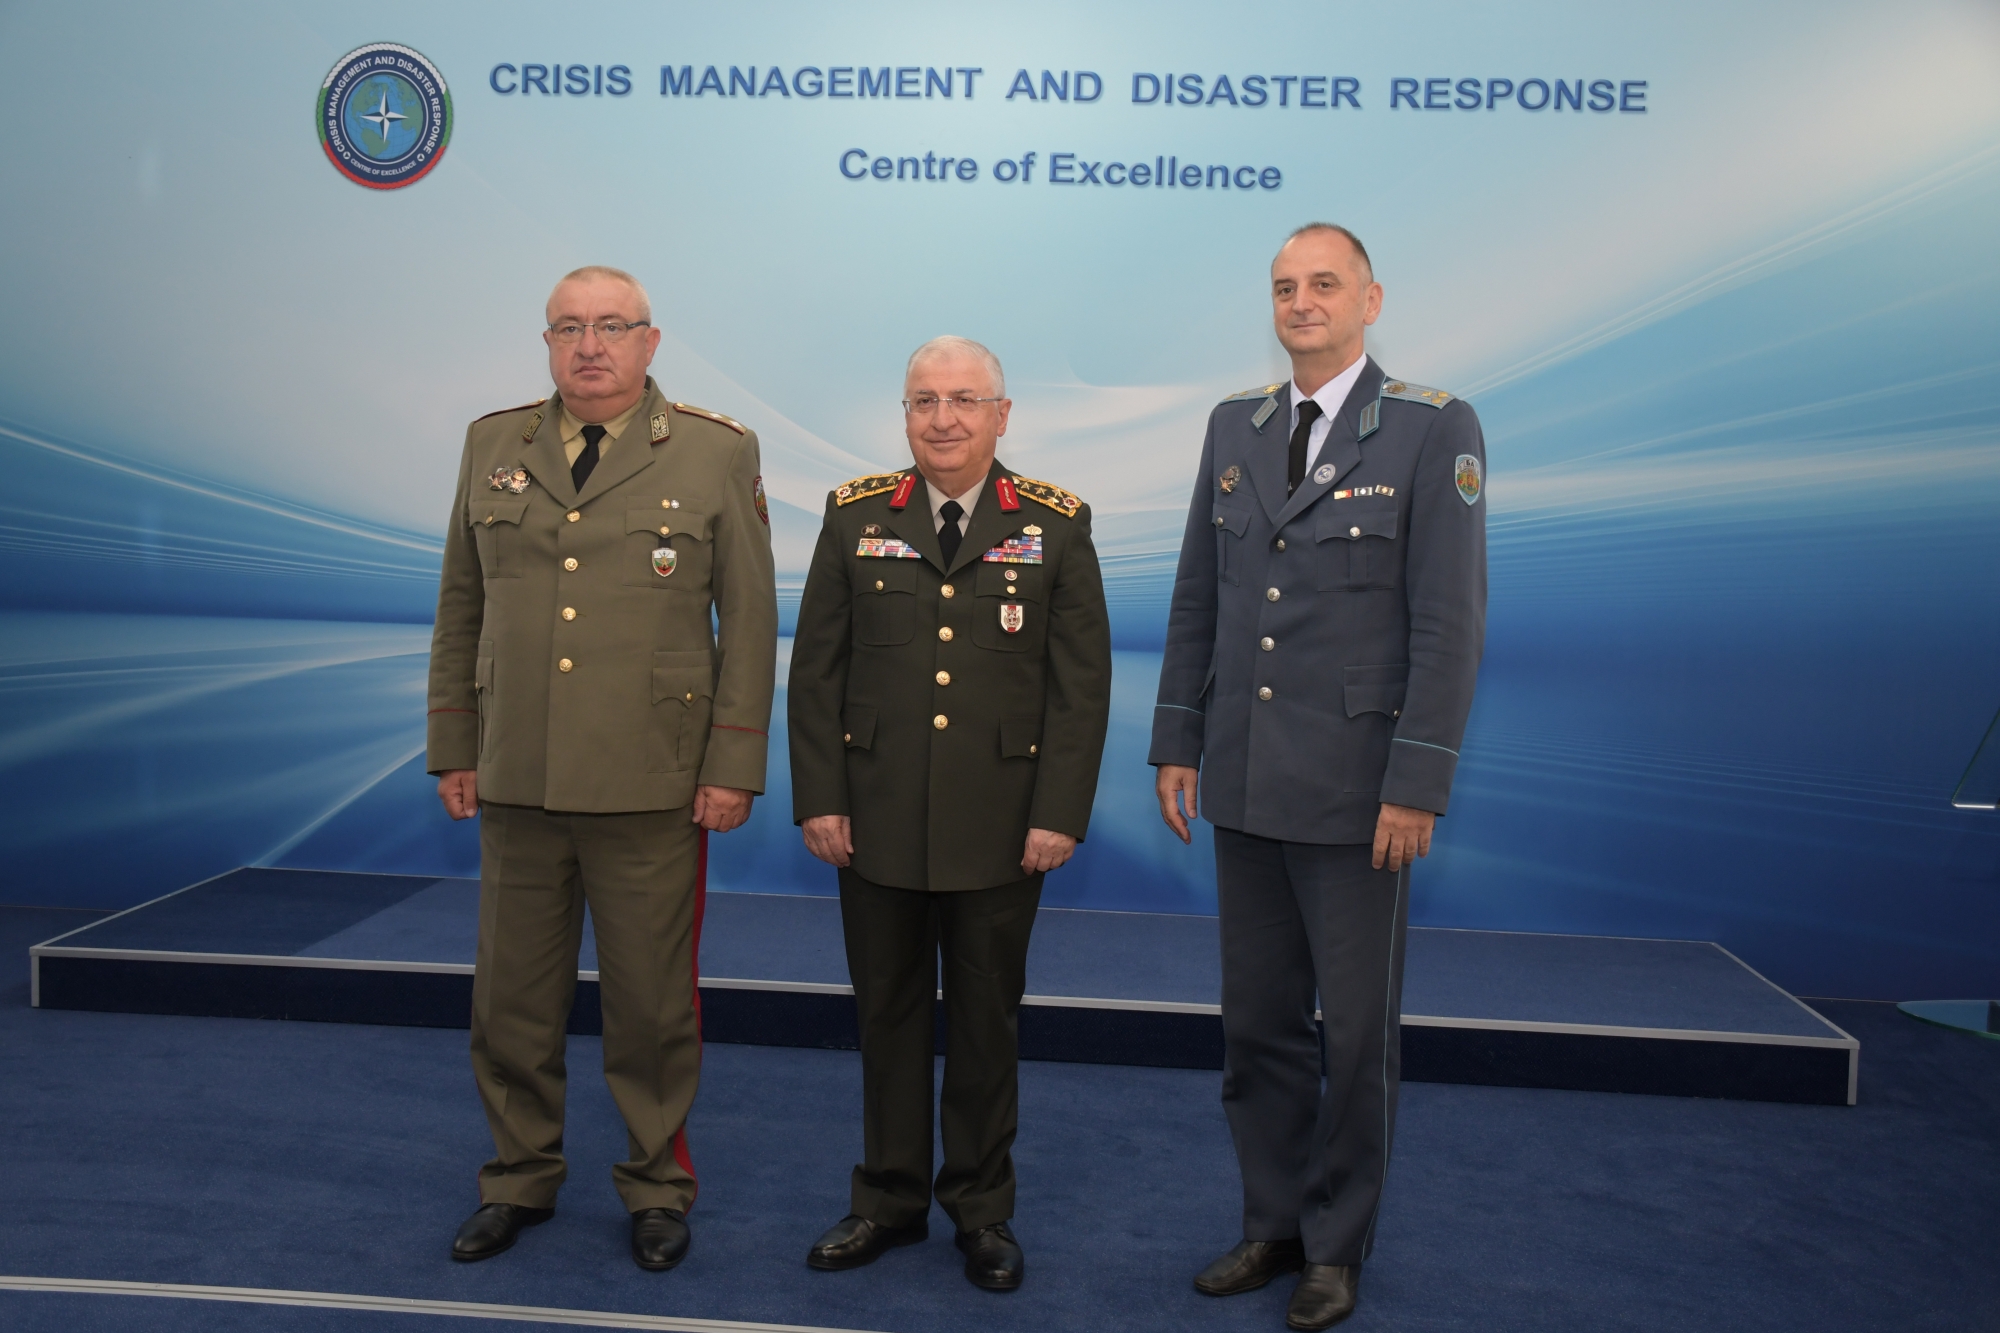 Visit of the Chief of Defence of the Republic of Turkey